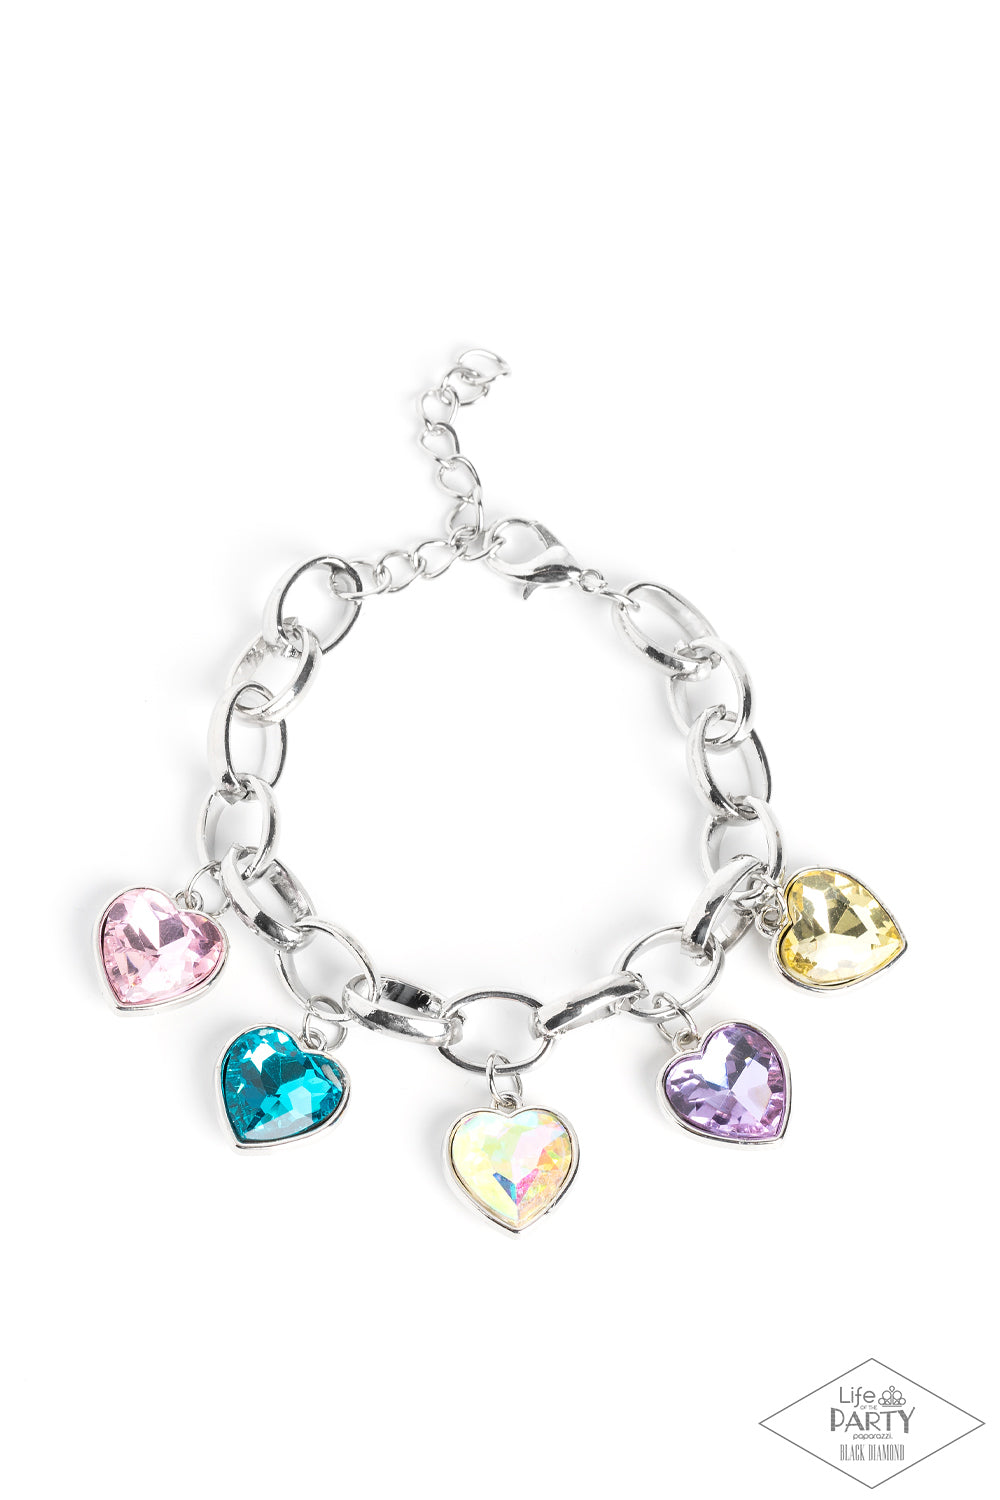 Candy Heart Charmer Multi Bracelet - Paparazzi Accessories  Multicolored heart-shaped gems are encased in sleek silver frames that swing from an oversized silver chain, creating a sparkly fringe around the wrist. Features an adjustable clasp closure. Due to its prismatic palette, color may vary.  Sold as one individual bracelet.  P9RE-MTXX-073XX